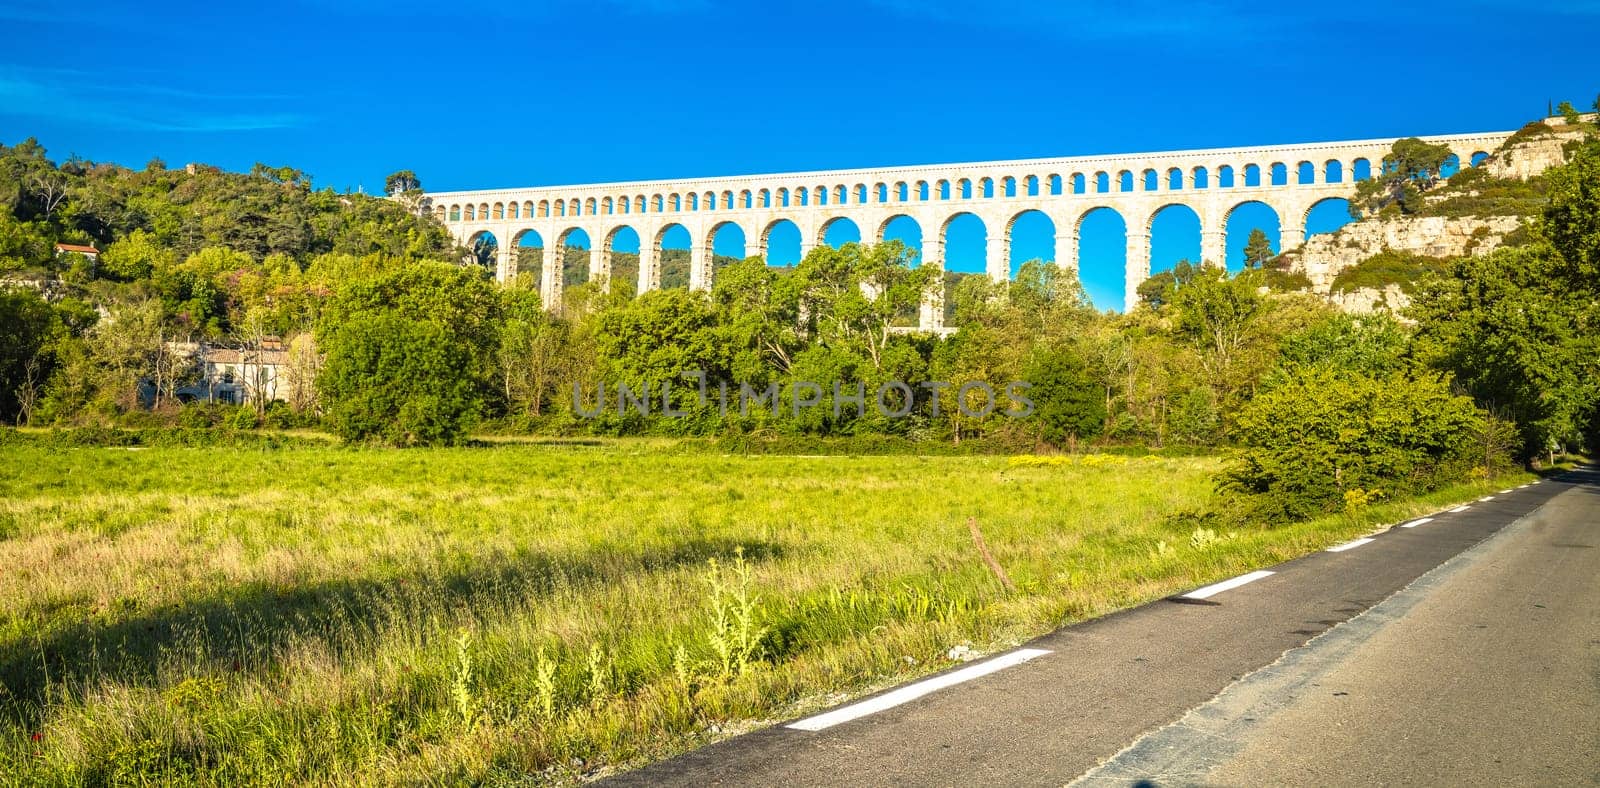 Roquefavour stone Aqueduct in green landscape panoramic view by xbrchx